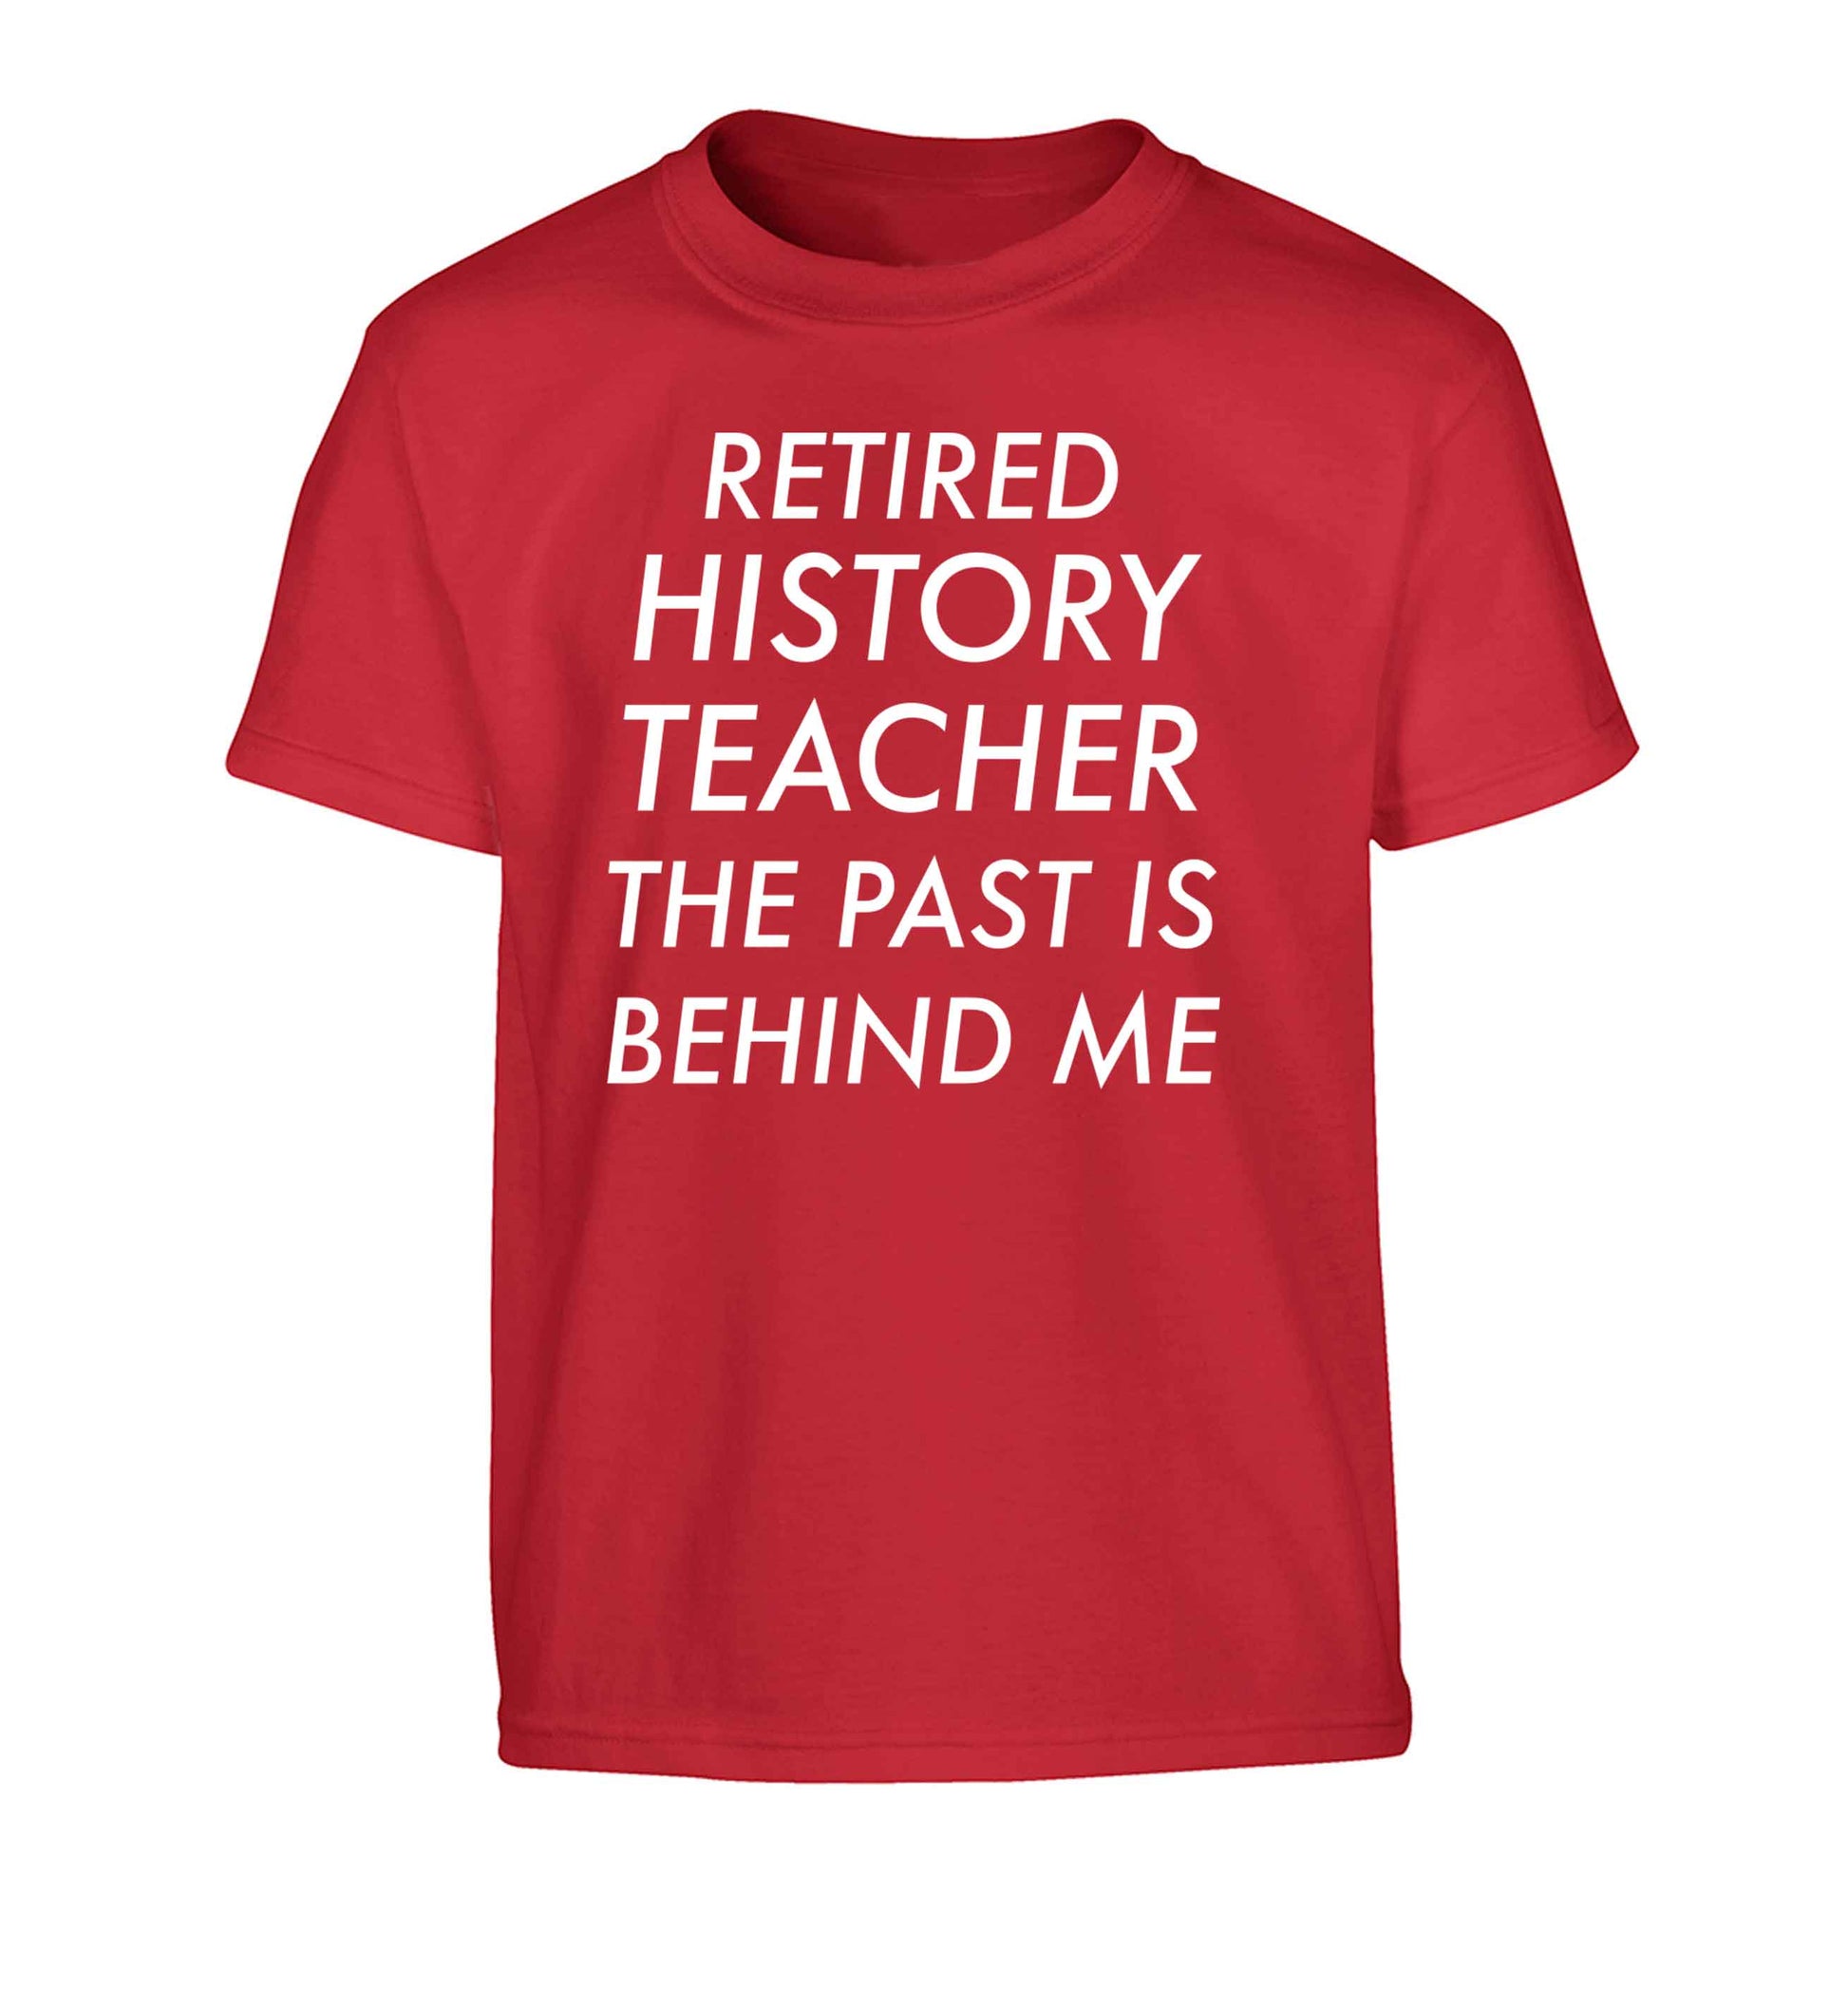 Retired history teacher the past is behind me Children's red Tshirt 12-13 Years